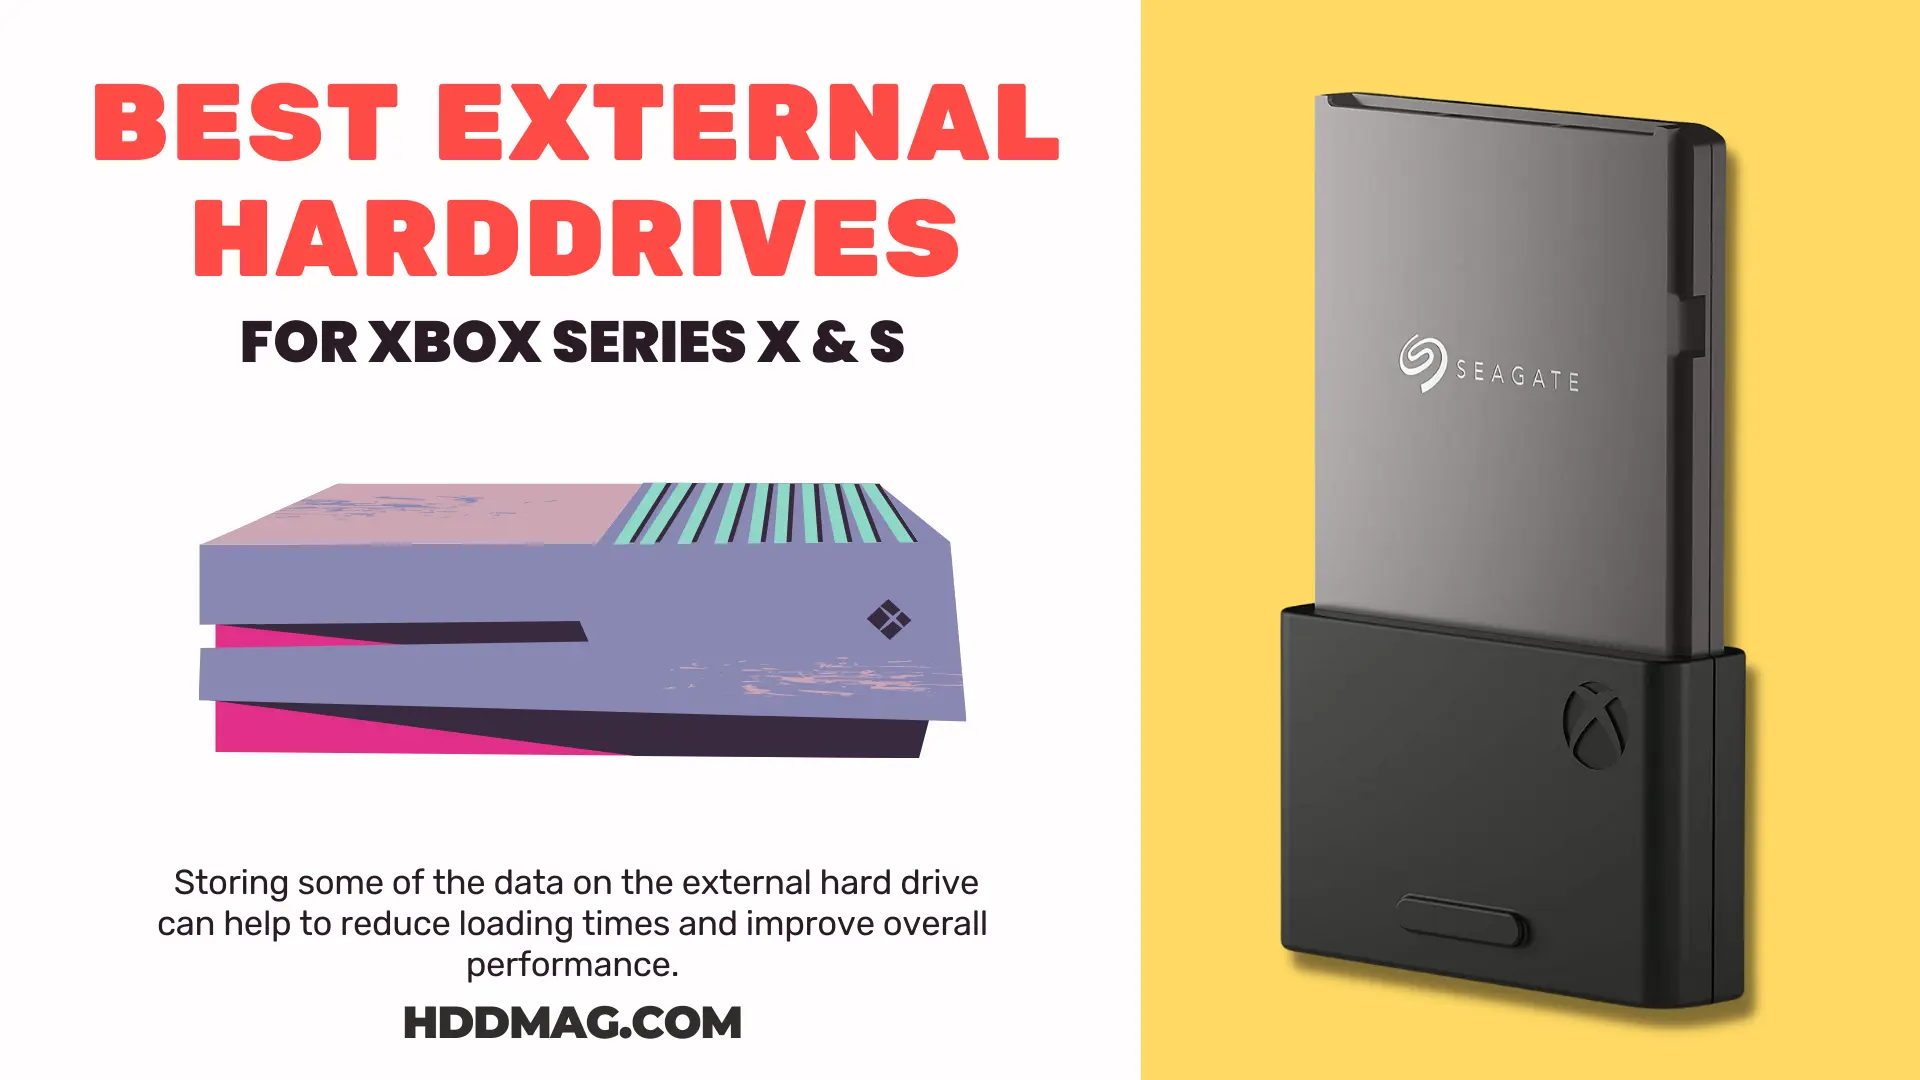 Best External Harddrives for Xbox Series X & S